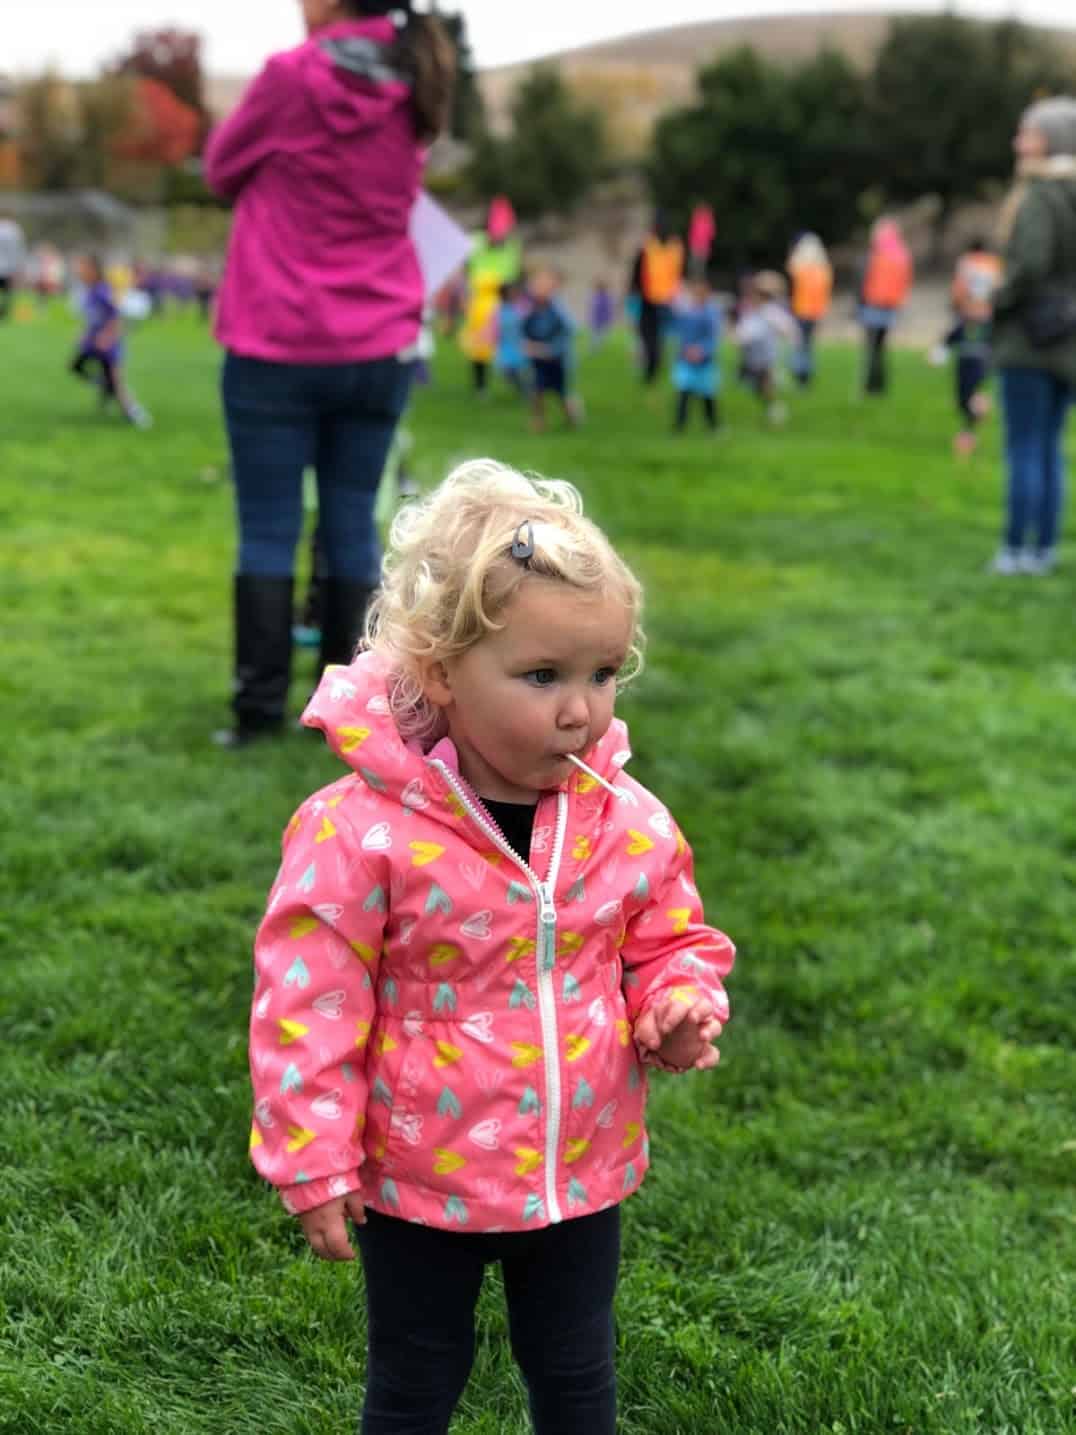 girl in a pink raincoat eating a lollipop while standing in a grassy field